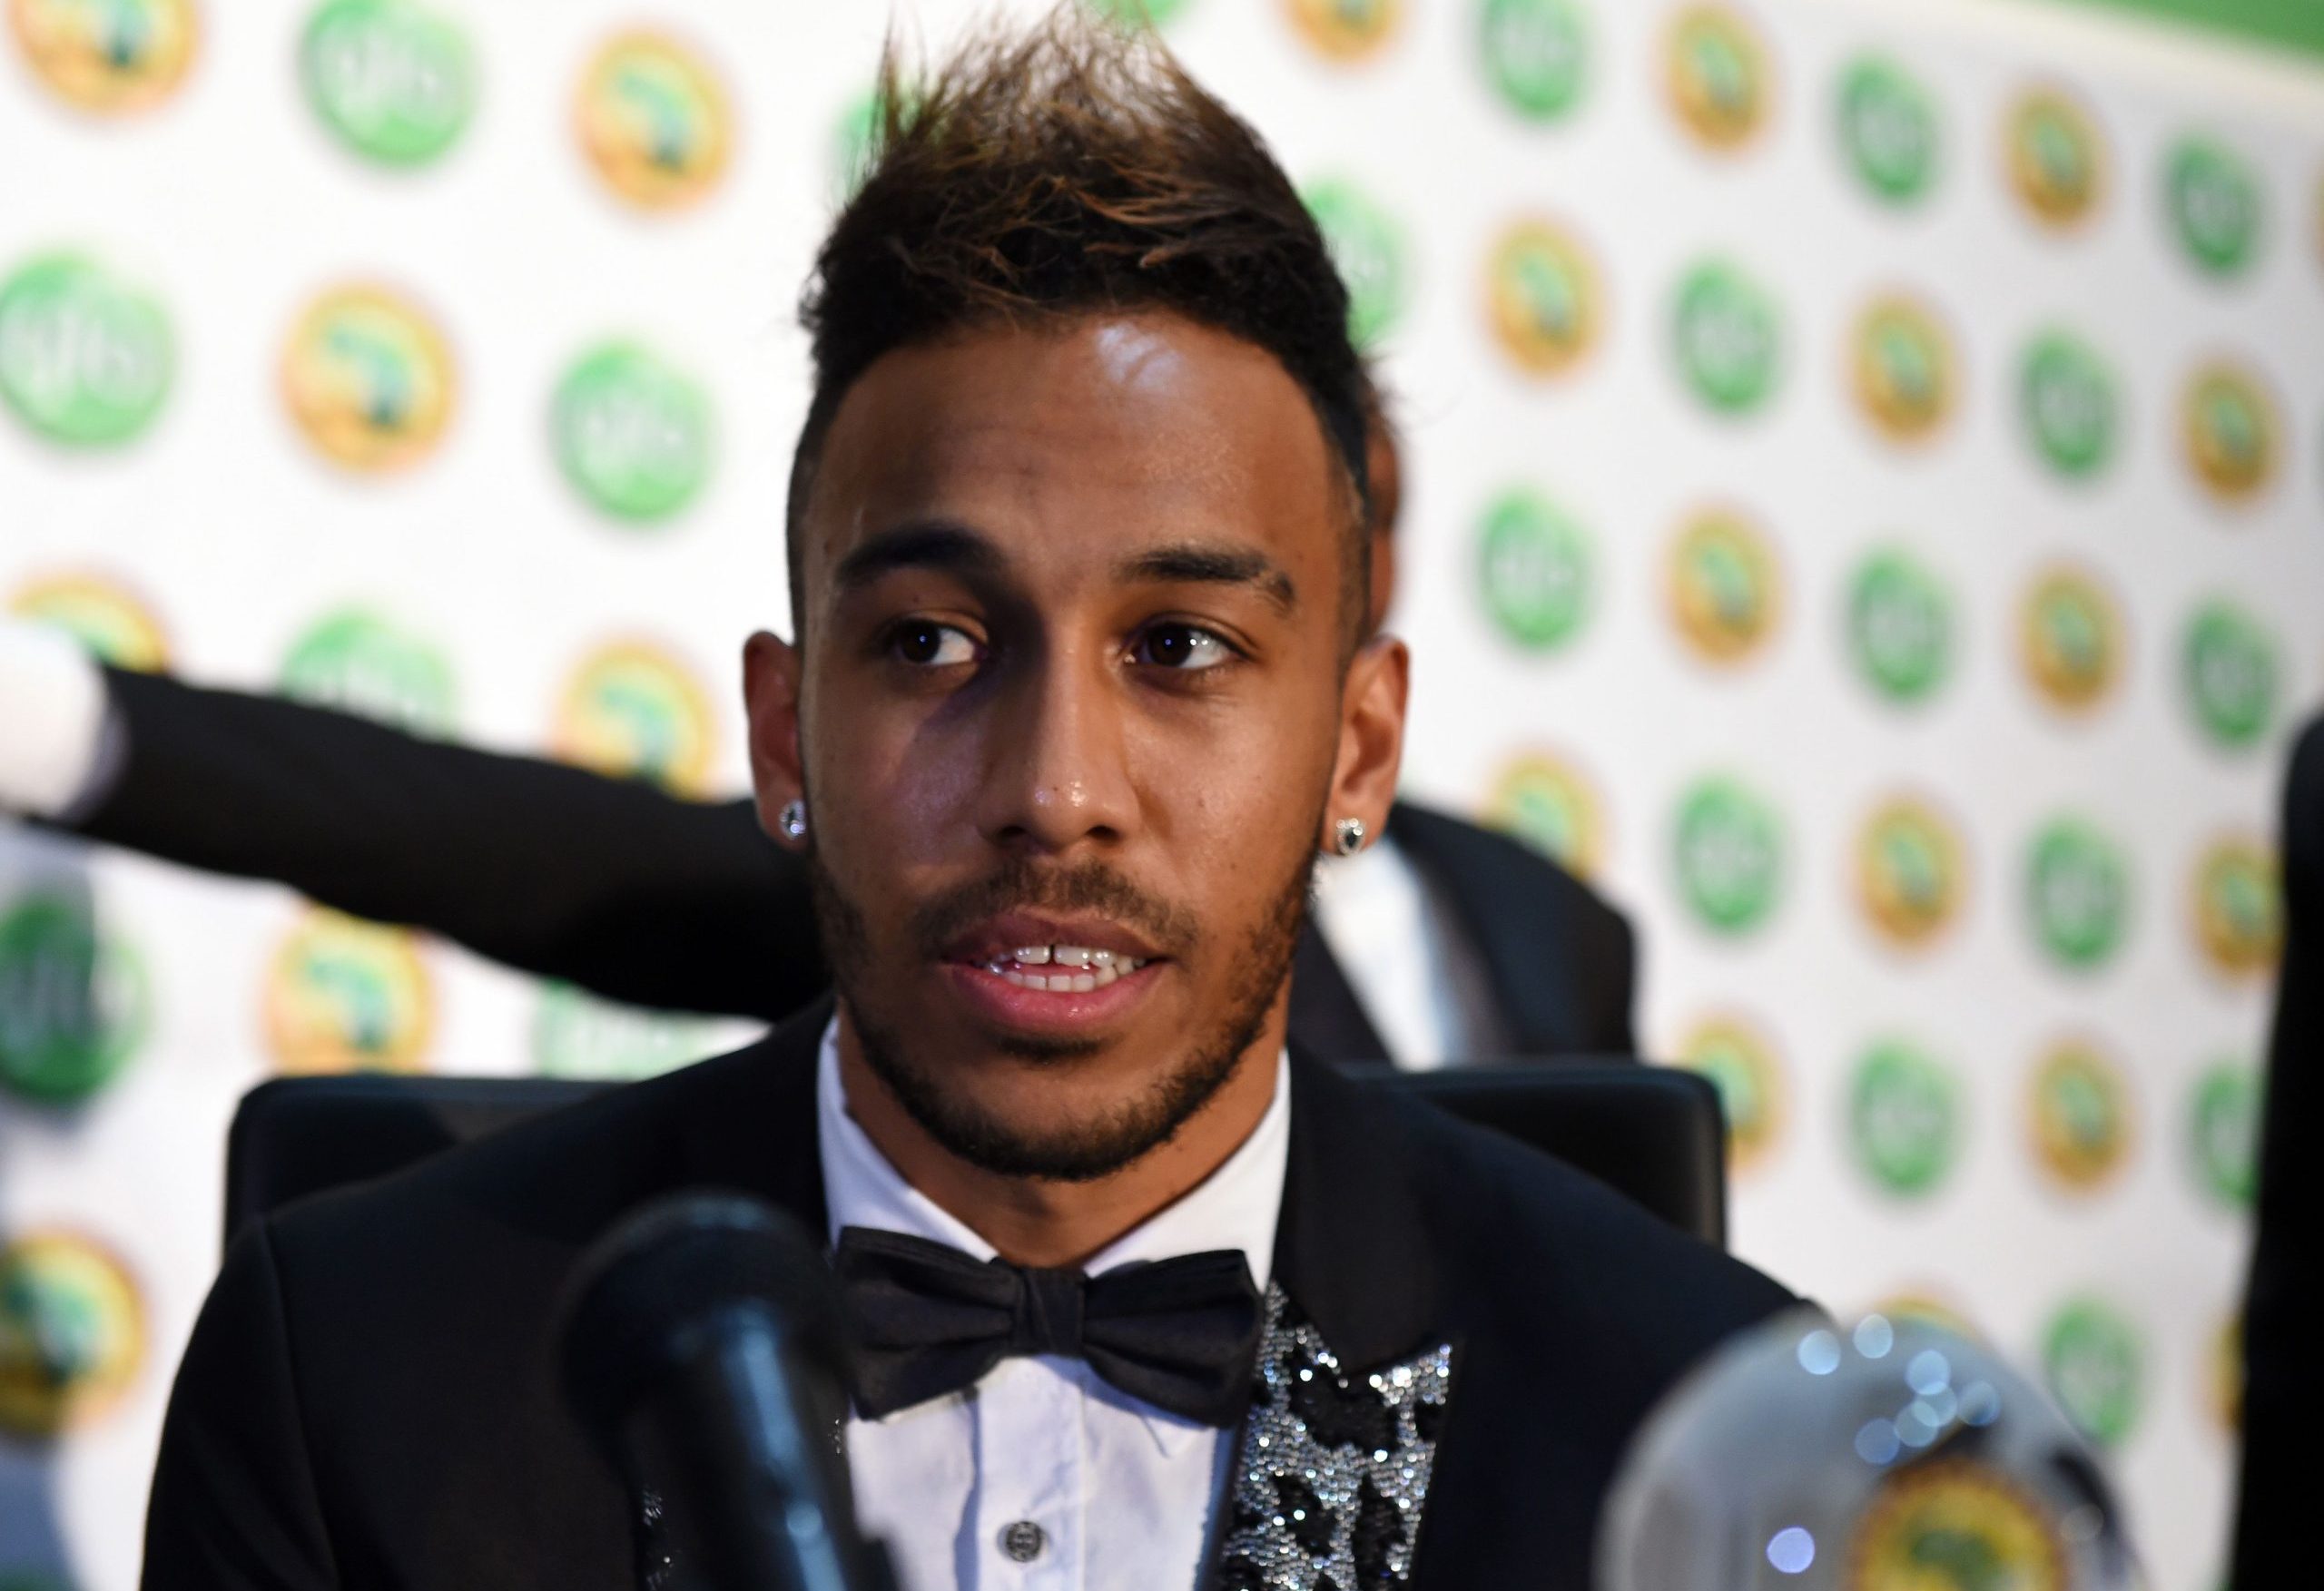 Chelsea star Pierre-Emerick Aubameyang has been sent to Milan to get his personalised mask.